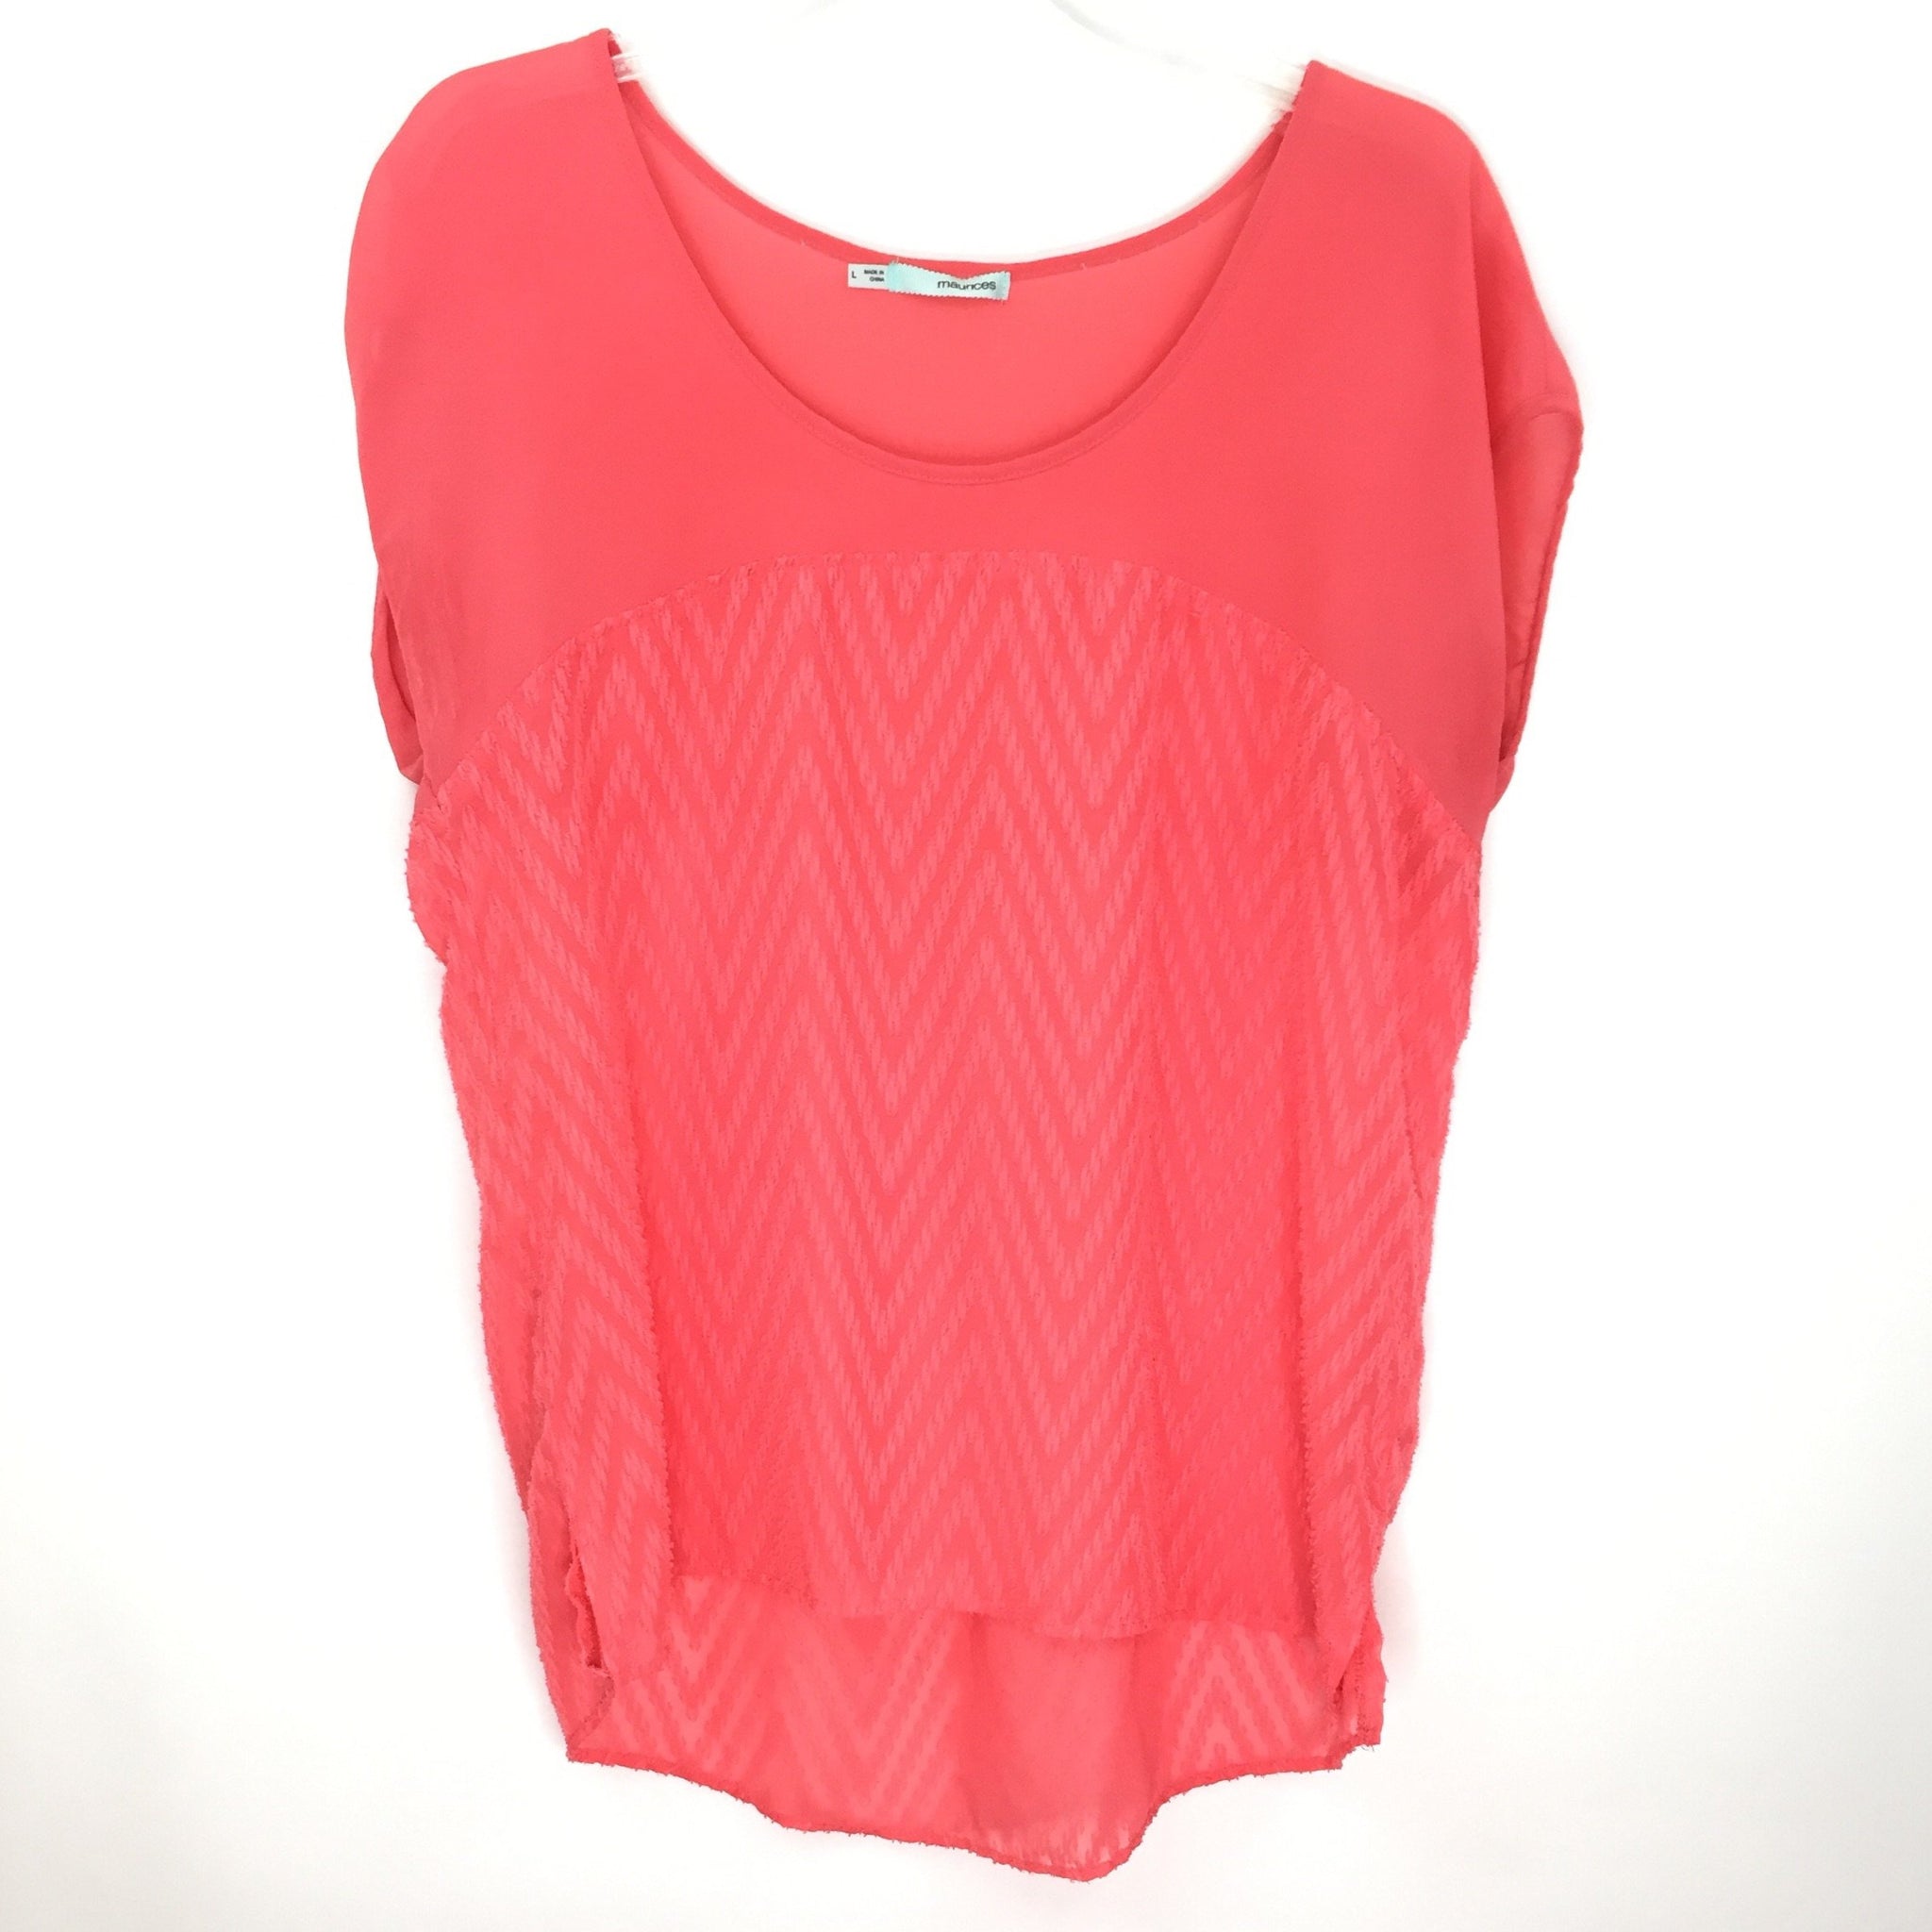 Maurices Womens Top Blouse - Solid Coral / Peach - Size Large